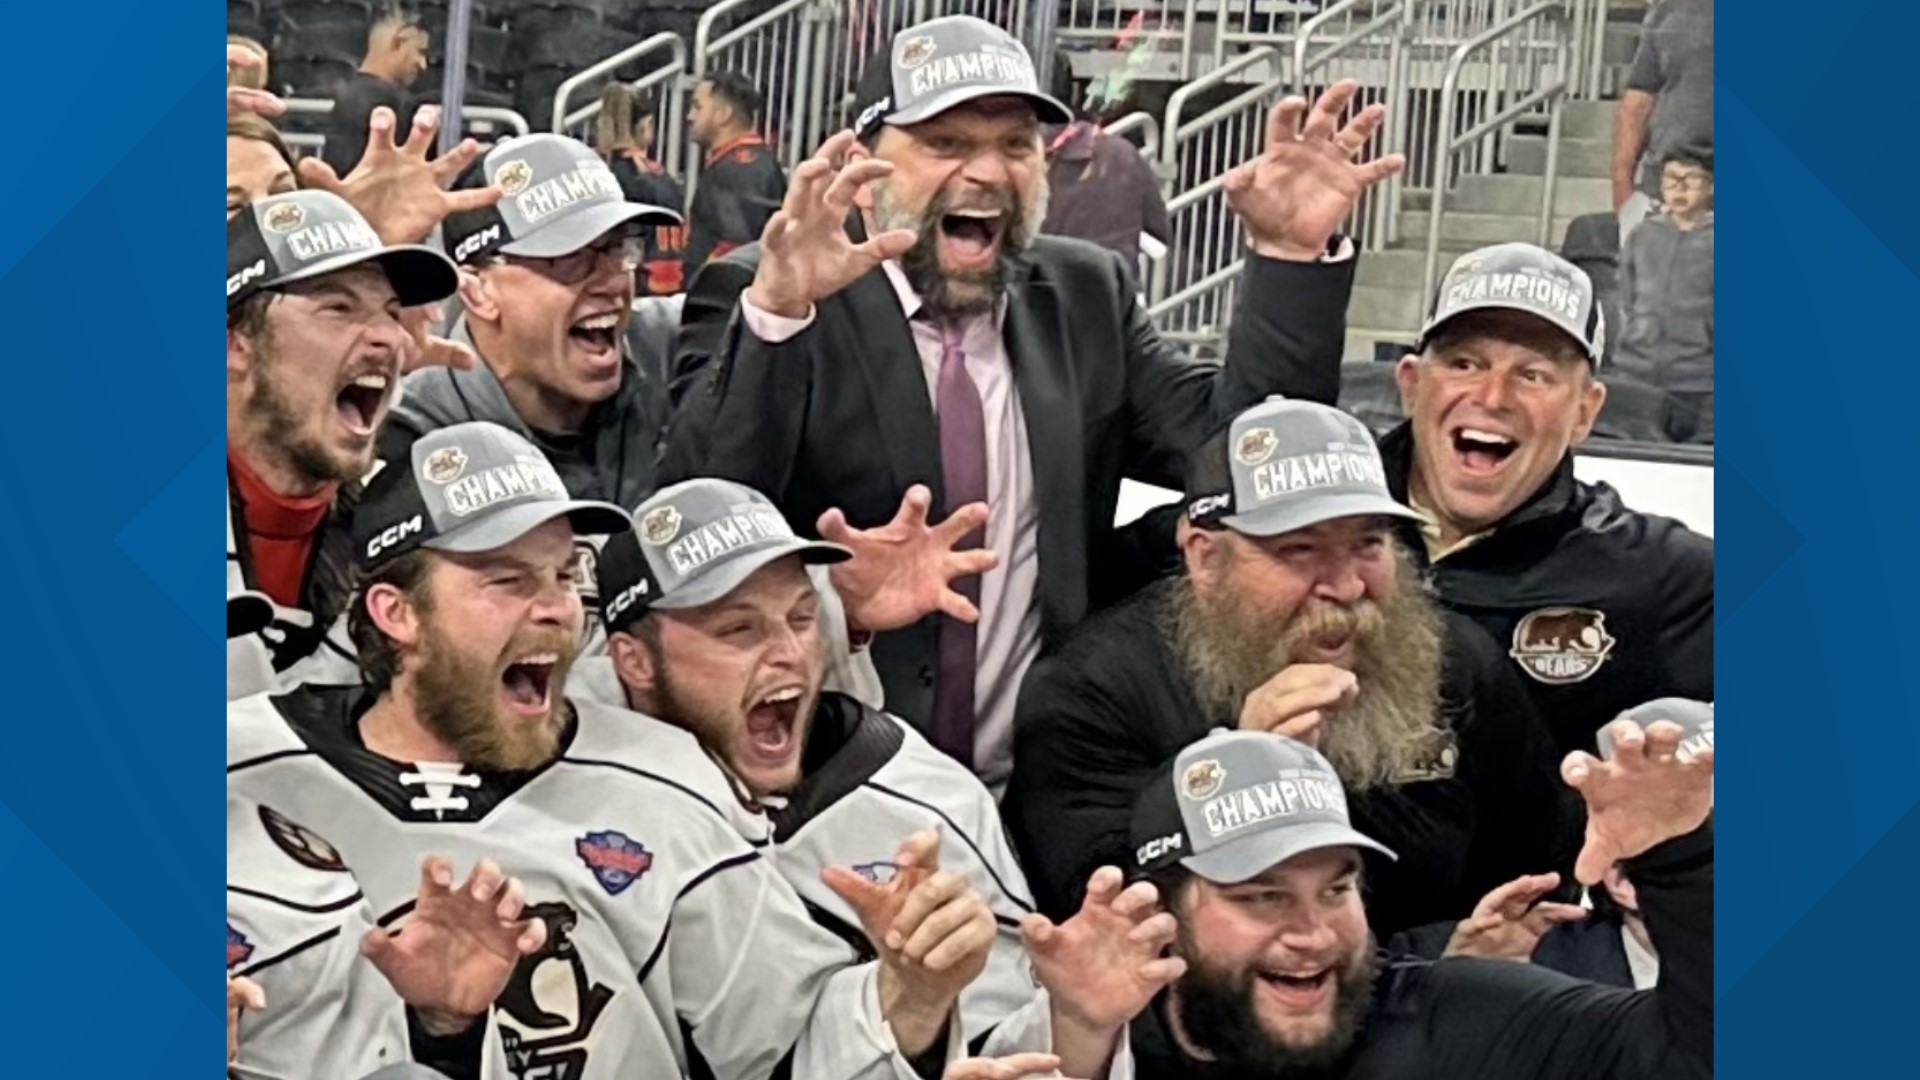 The latest playoff series victory over Lehigh Valley highlights what makes this year's team another championship contender.